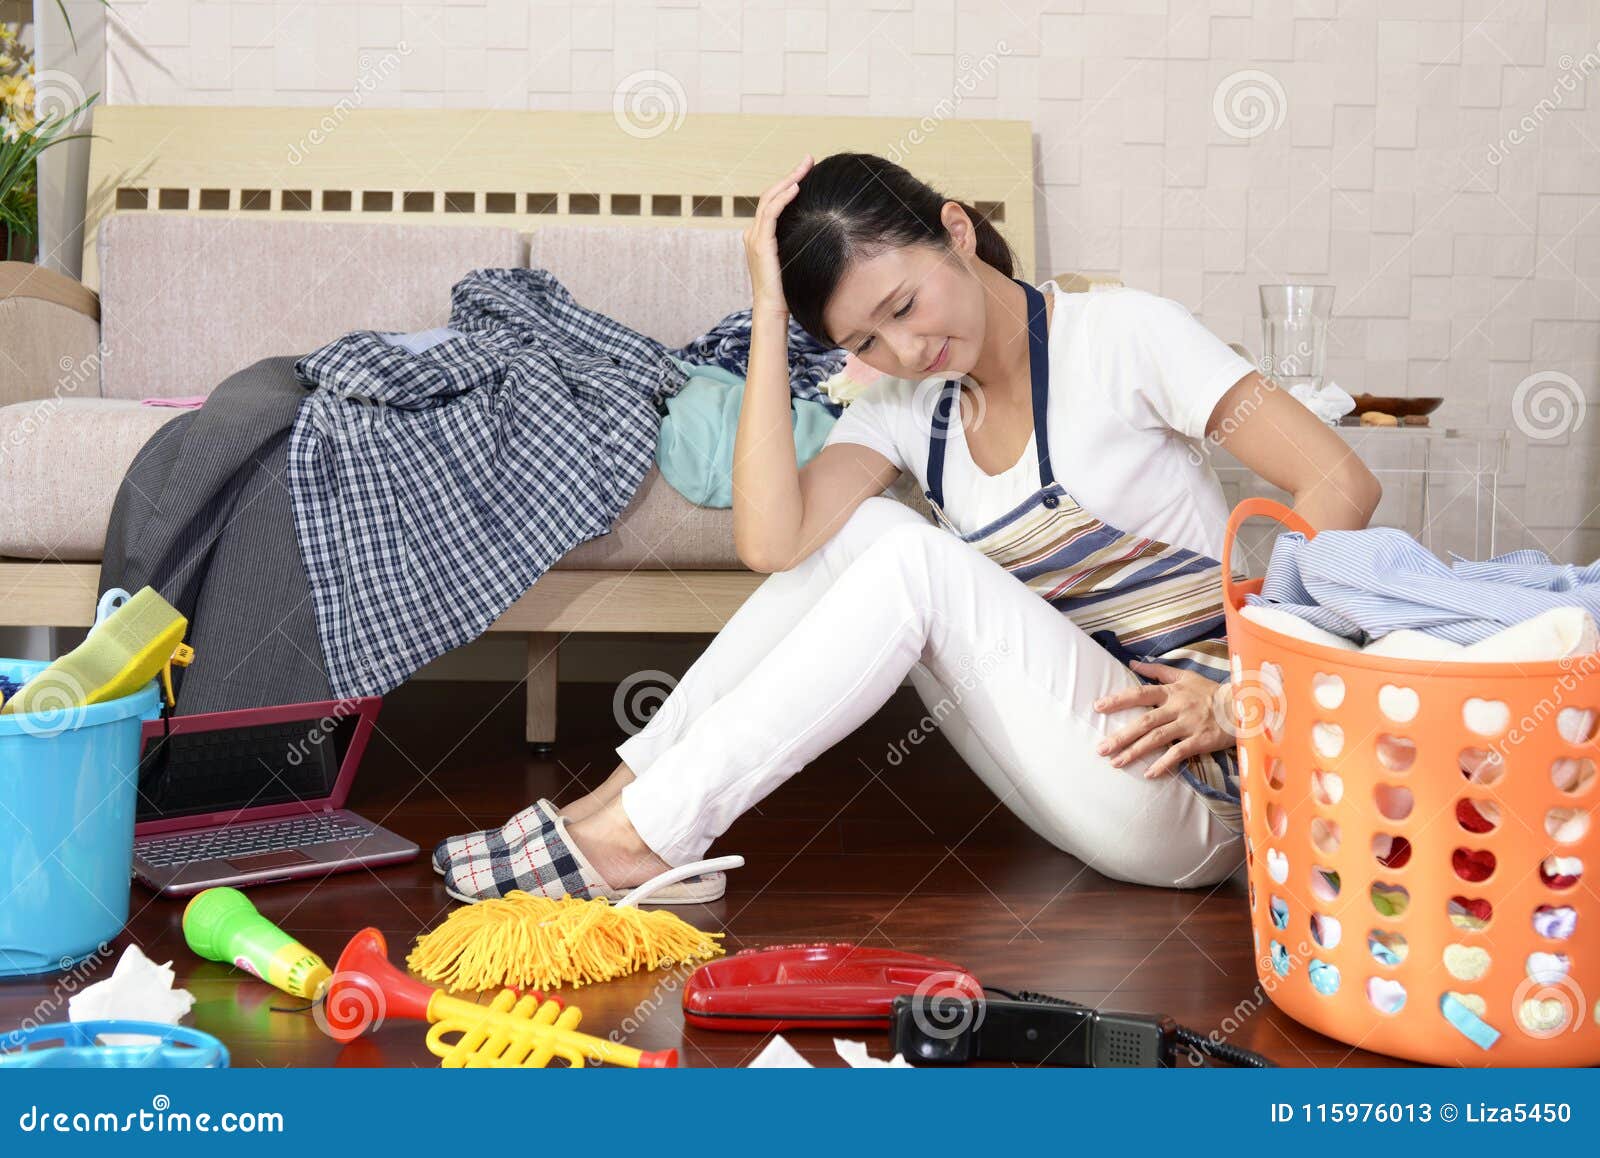 Tired Asian Housewife Stock Image Image Of Distress 115976013